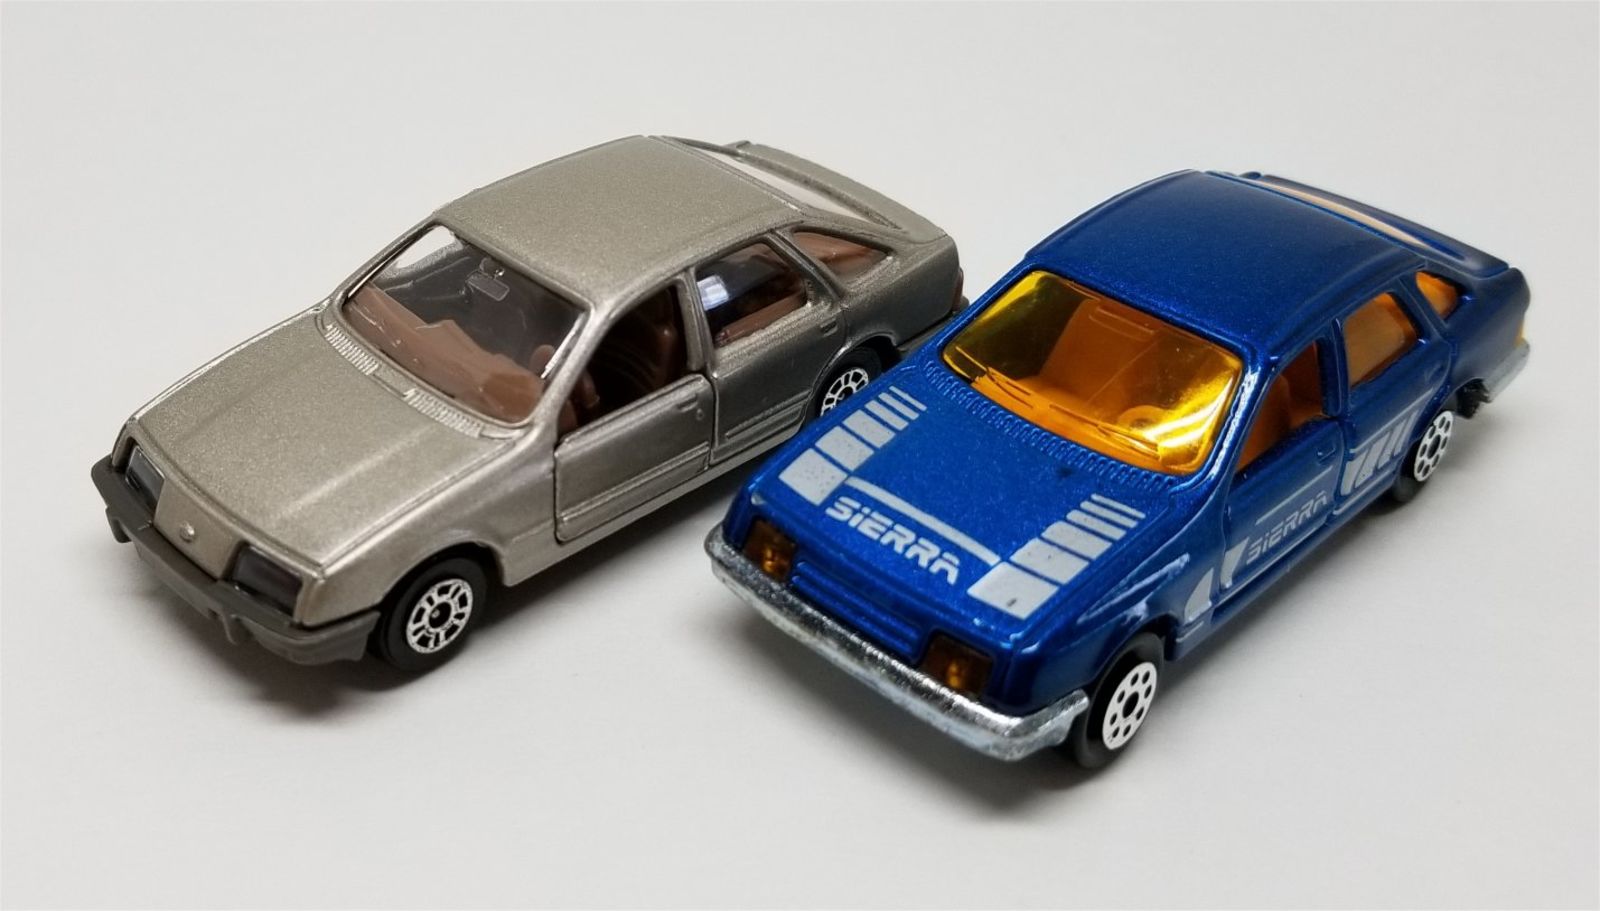 Illustration for article titled Surprise Saturday: Corgi Ford Sierra 2.3 Ghia promotional model - and hoard sale update